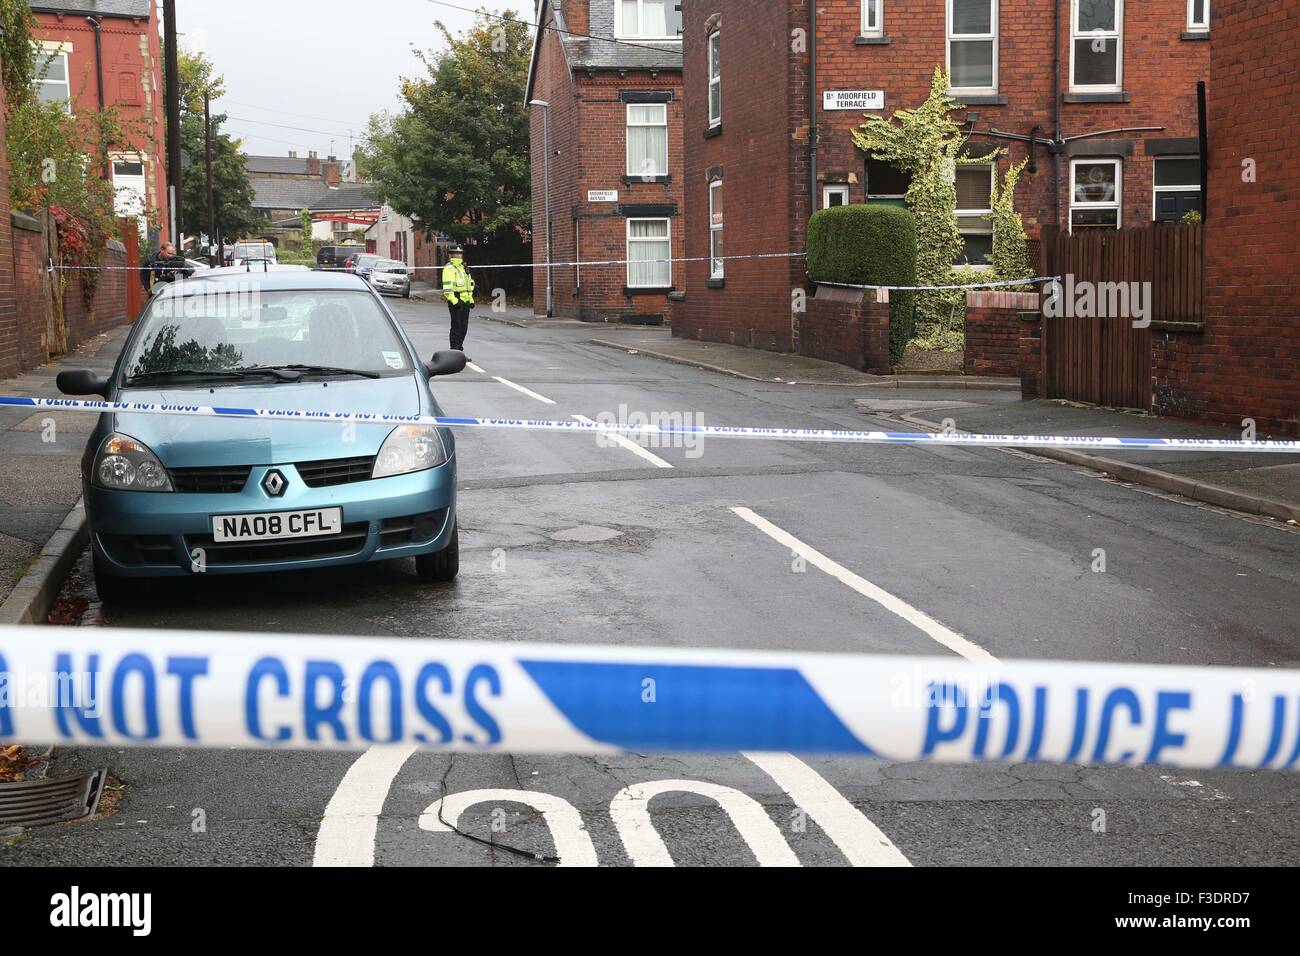 Leeds, Yorkshire, UK. 6th October, 2015. Police guard the scene of a murder in Leeds, West Yorkshire, on October 6th 2015. Police were called to Moorfield Avenue in Armley, Leeds, UK late last night. Officers searched the area and found a 27-year-old man in Back Moorfield Terrace. Although paramedics treated the man, he was pronounced dead at the scene. A 43-year-old man has been arrested on suspicion of murder and is currently in custody.  Ian Hinchliffe /Alamy Live News Stock Photo